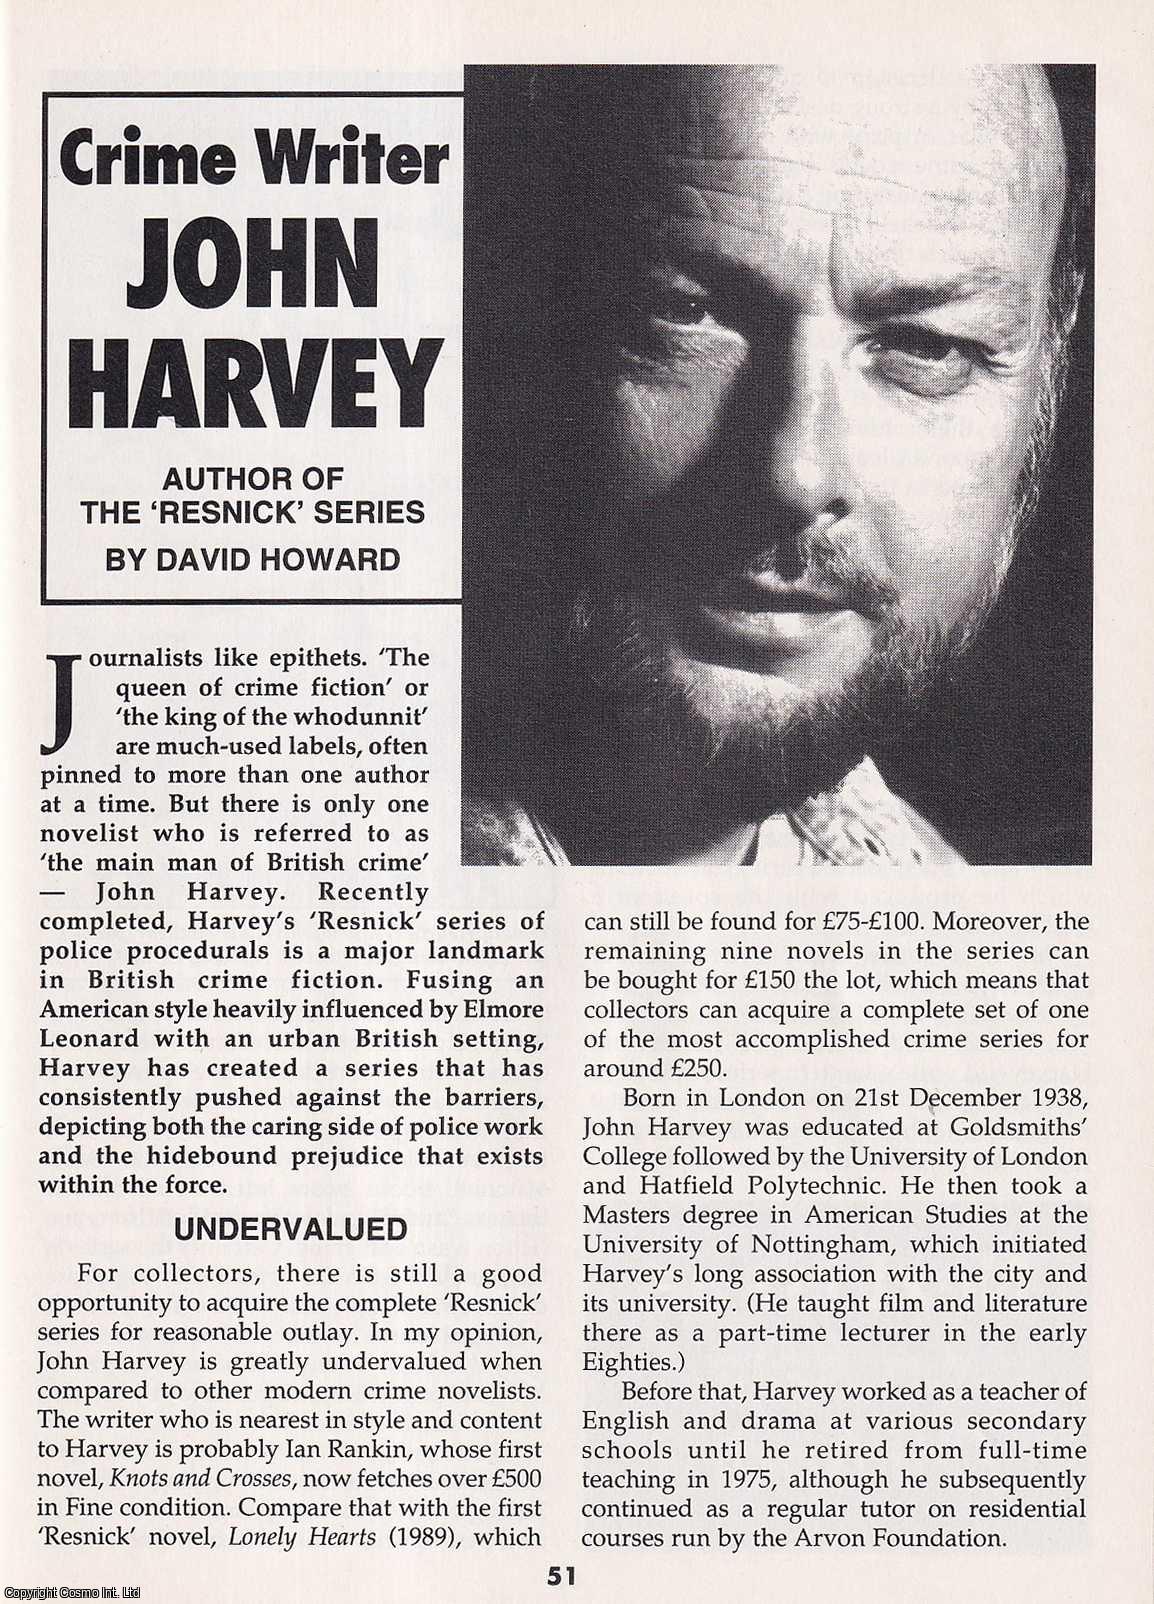 David Howard - John Harvey : Crime Writer. Author of The Resnick Series. This is an original article separated from an issue of The Book & Magazine Collector publication, 2000.